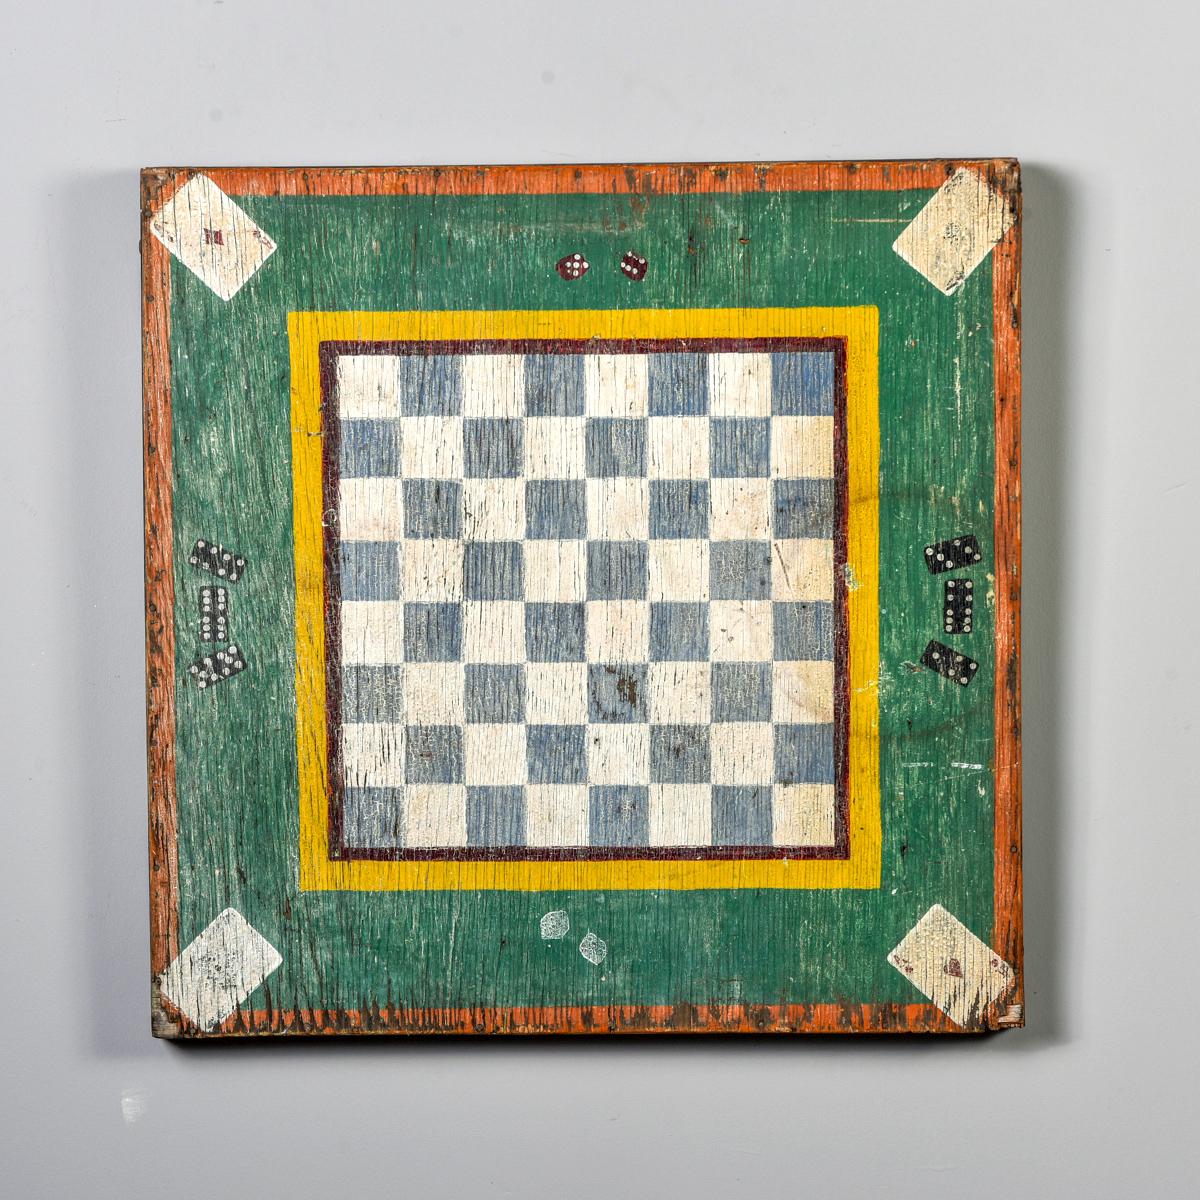 Found in England, this circa 1900 large wooden game board is over 28” square. Original paint features checkerboard center with dice and dominoes in the green border and aces in each corner. Honest wear to paint. Fun authentic folk art piece.